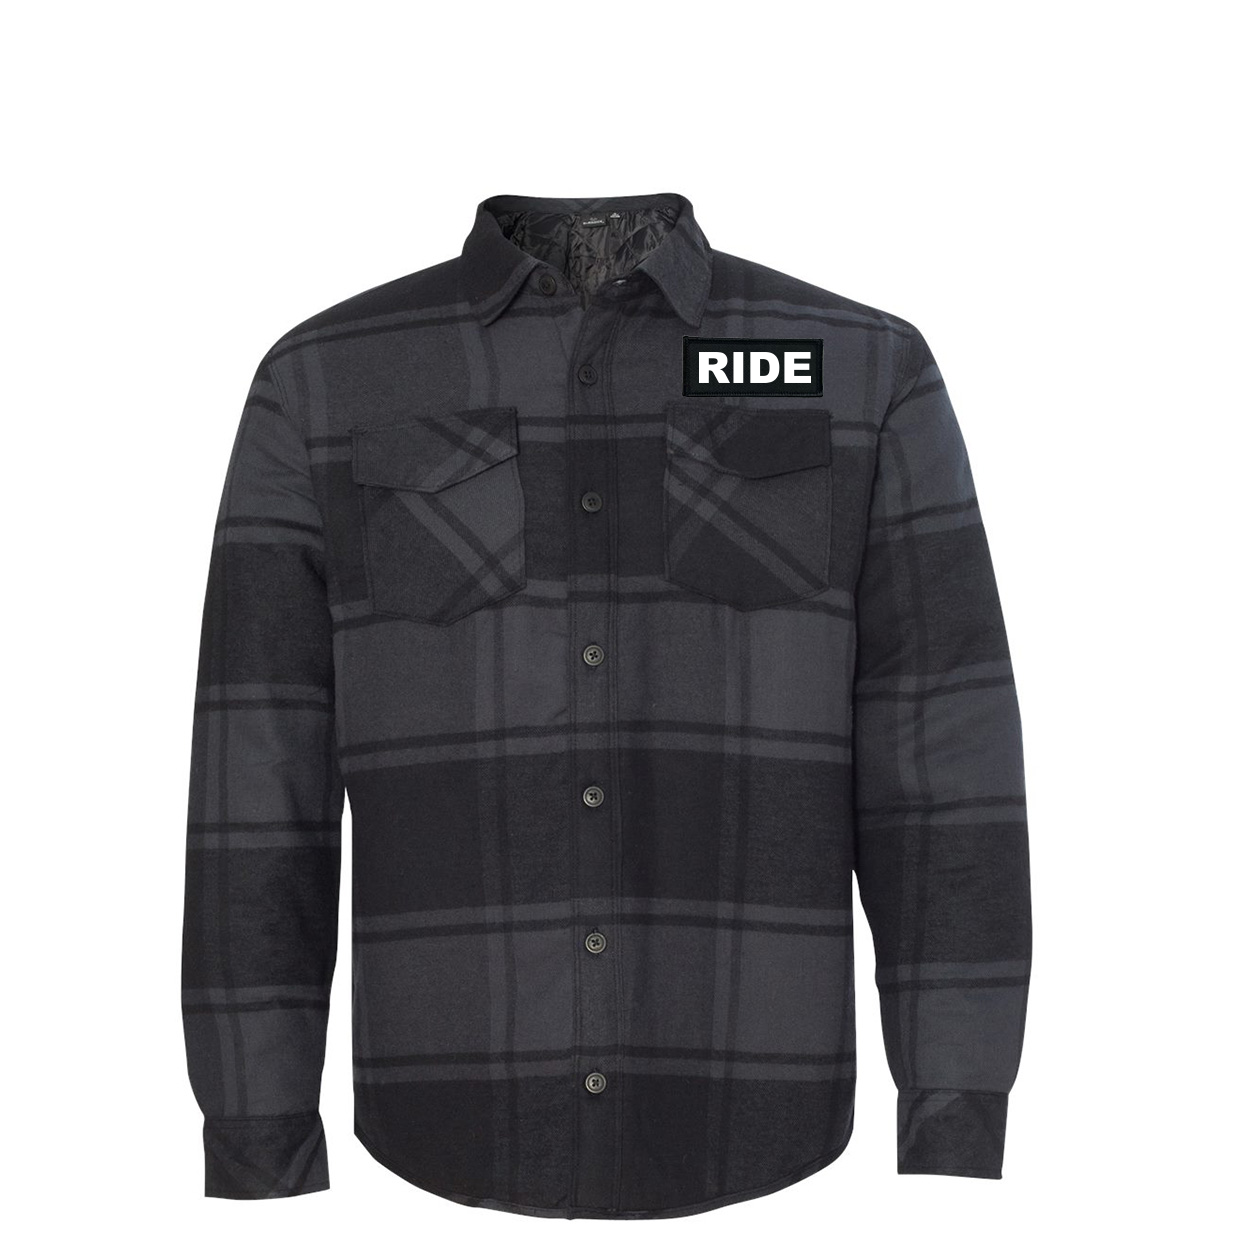 Ride Brand Logo Classic Unisex Woven Patch Quilted Button Flannel Jacket Black/Plaid (White Logo)